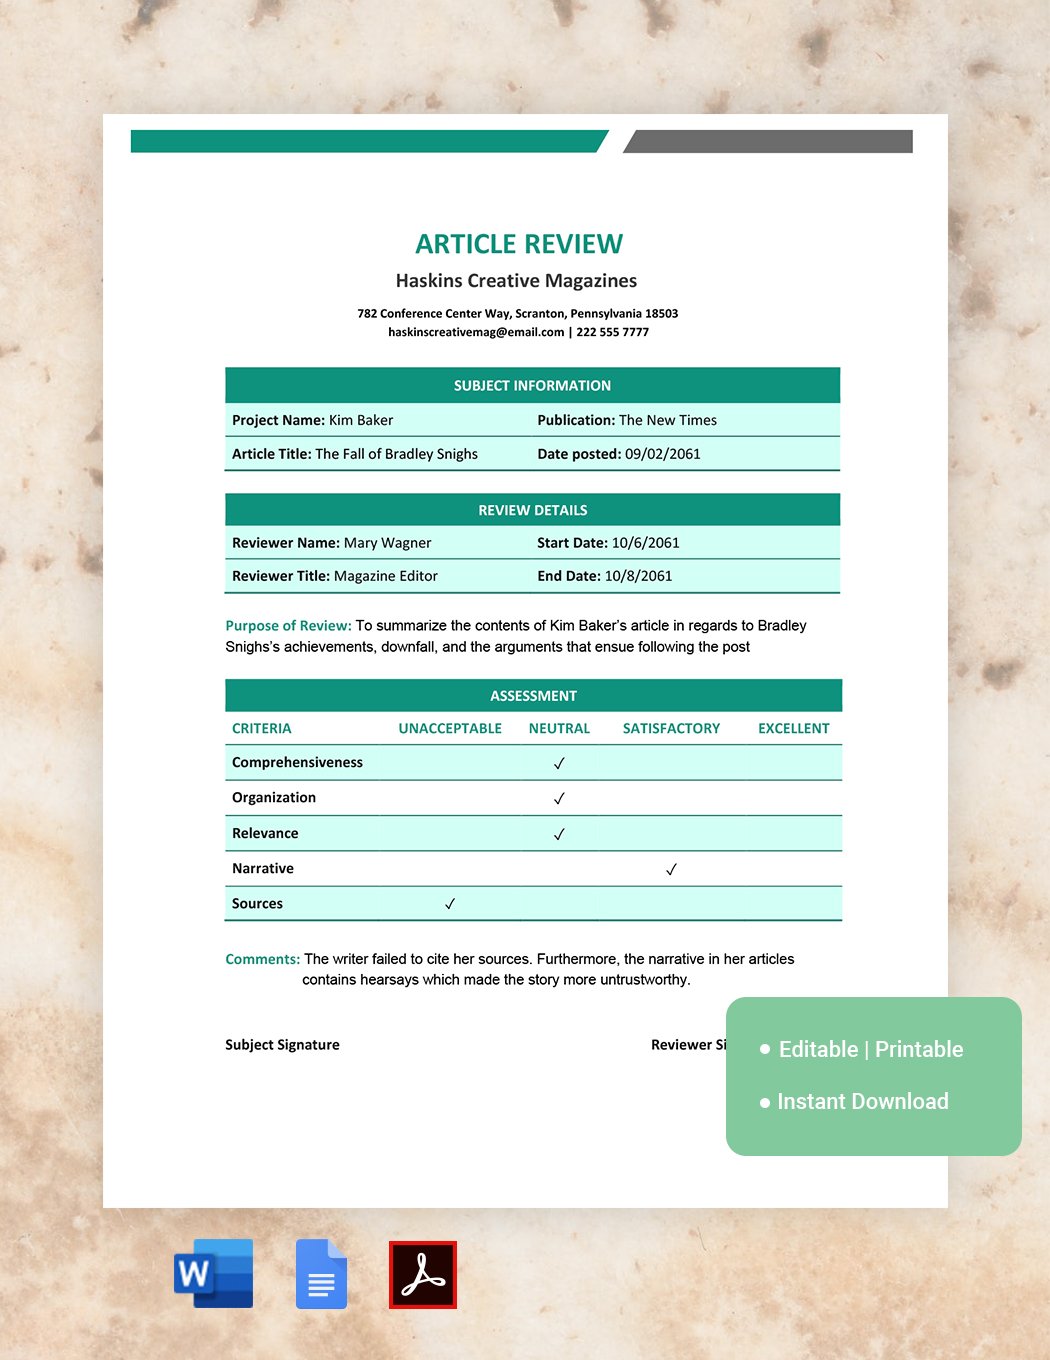 Article Review Template in Word, Google Docs